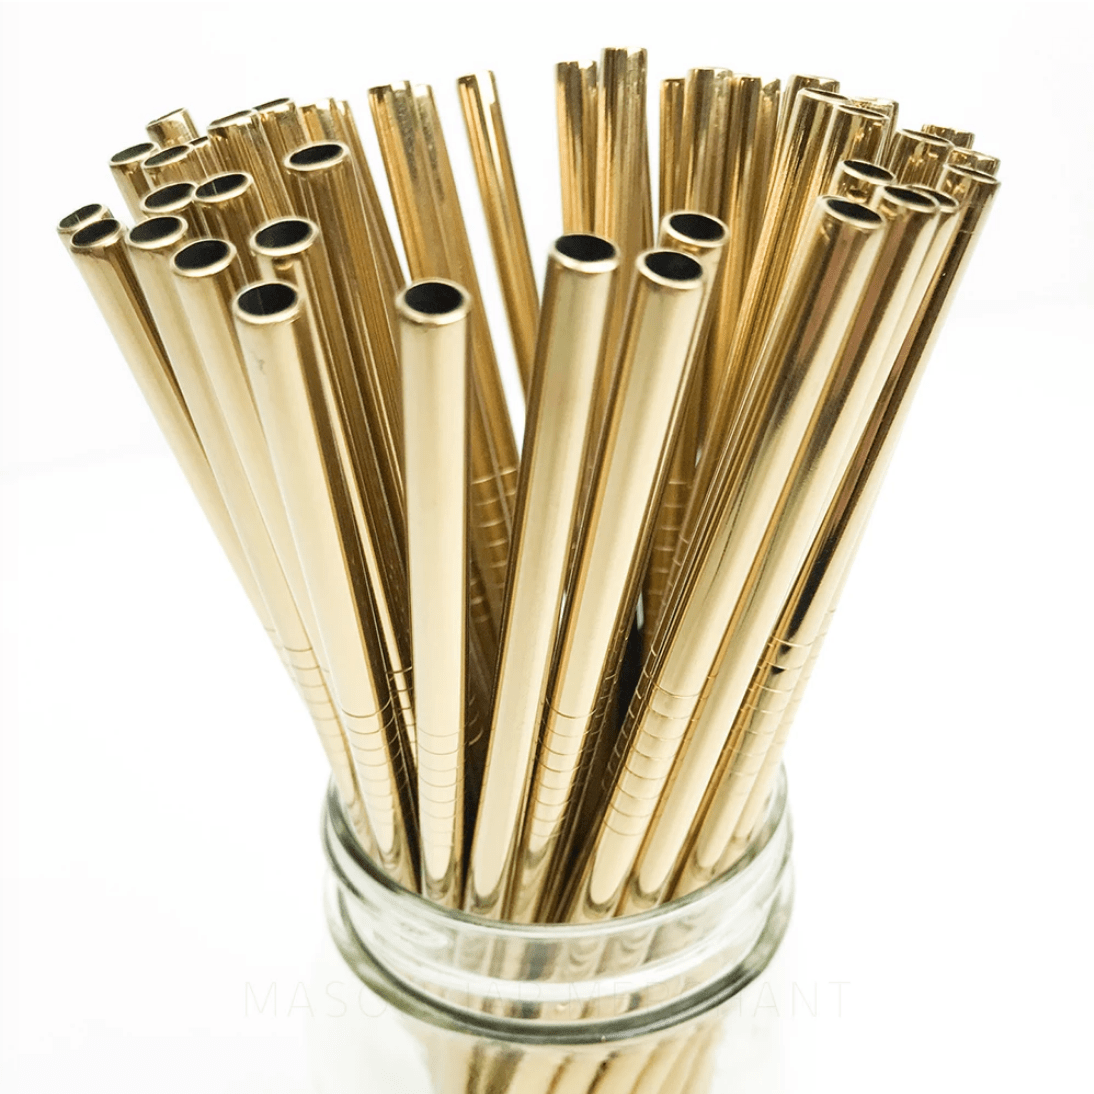 8.5 inch straight gold stainless steel reusable straw